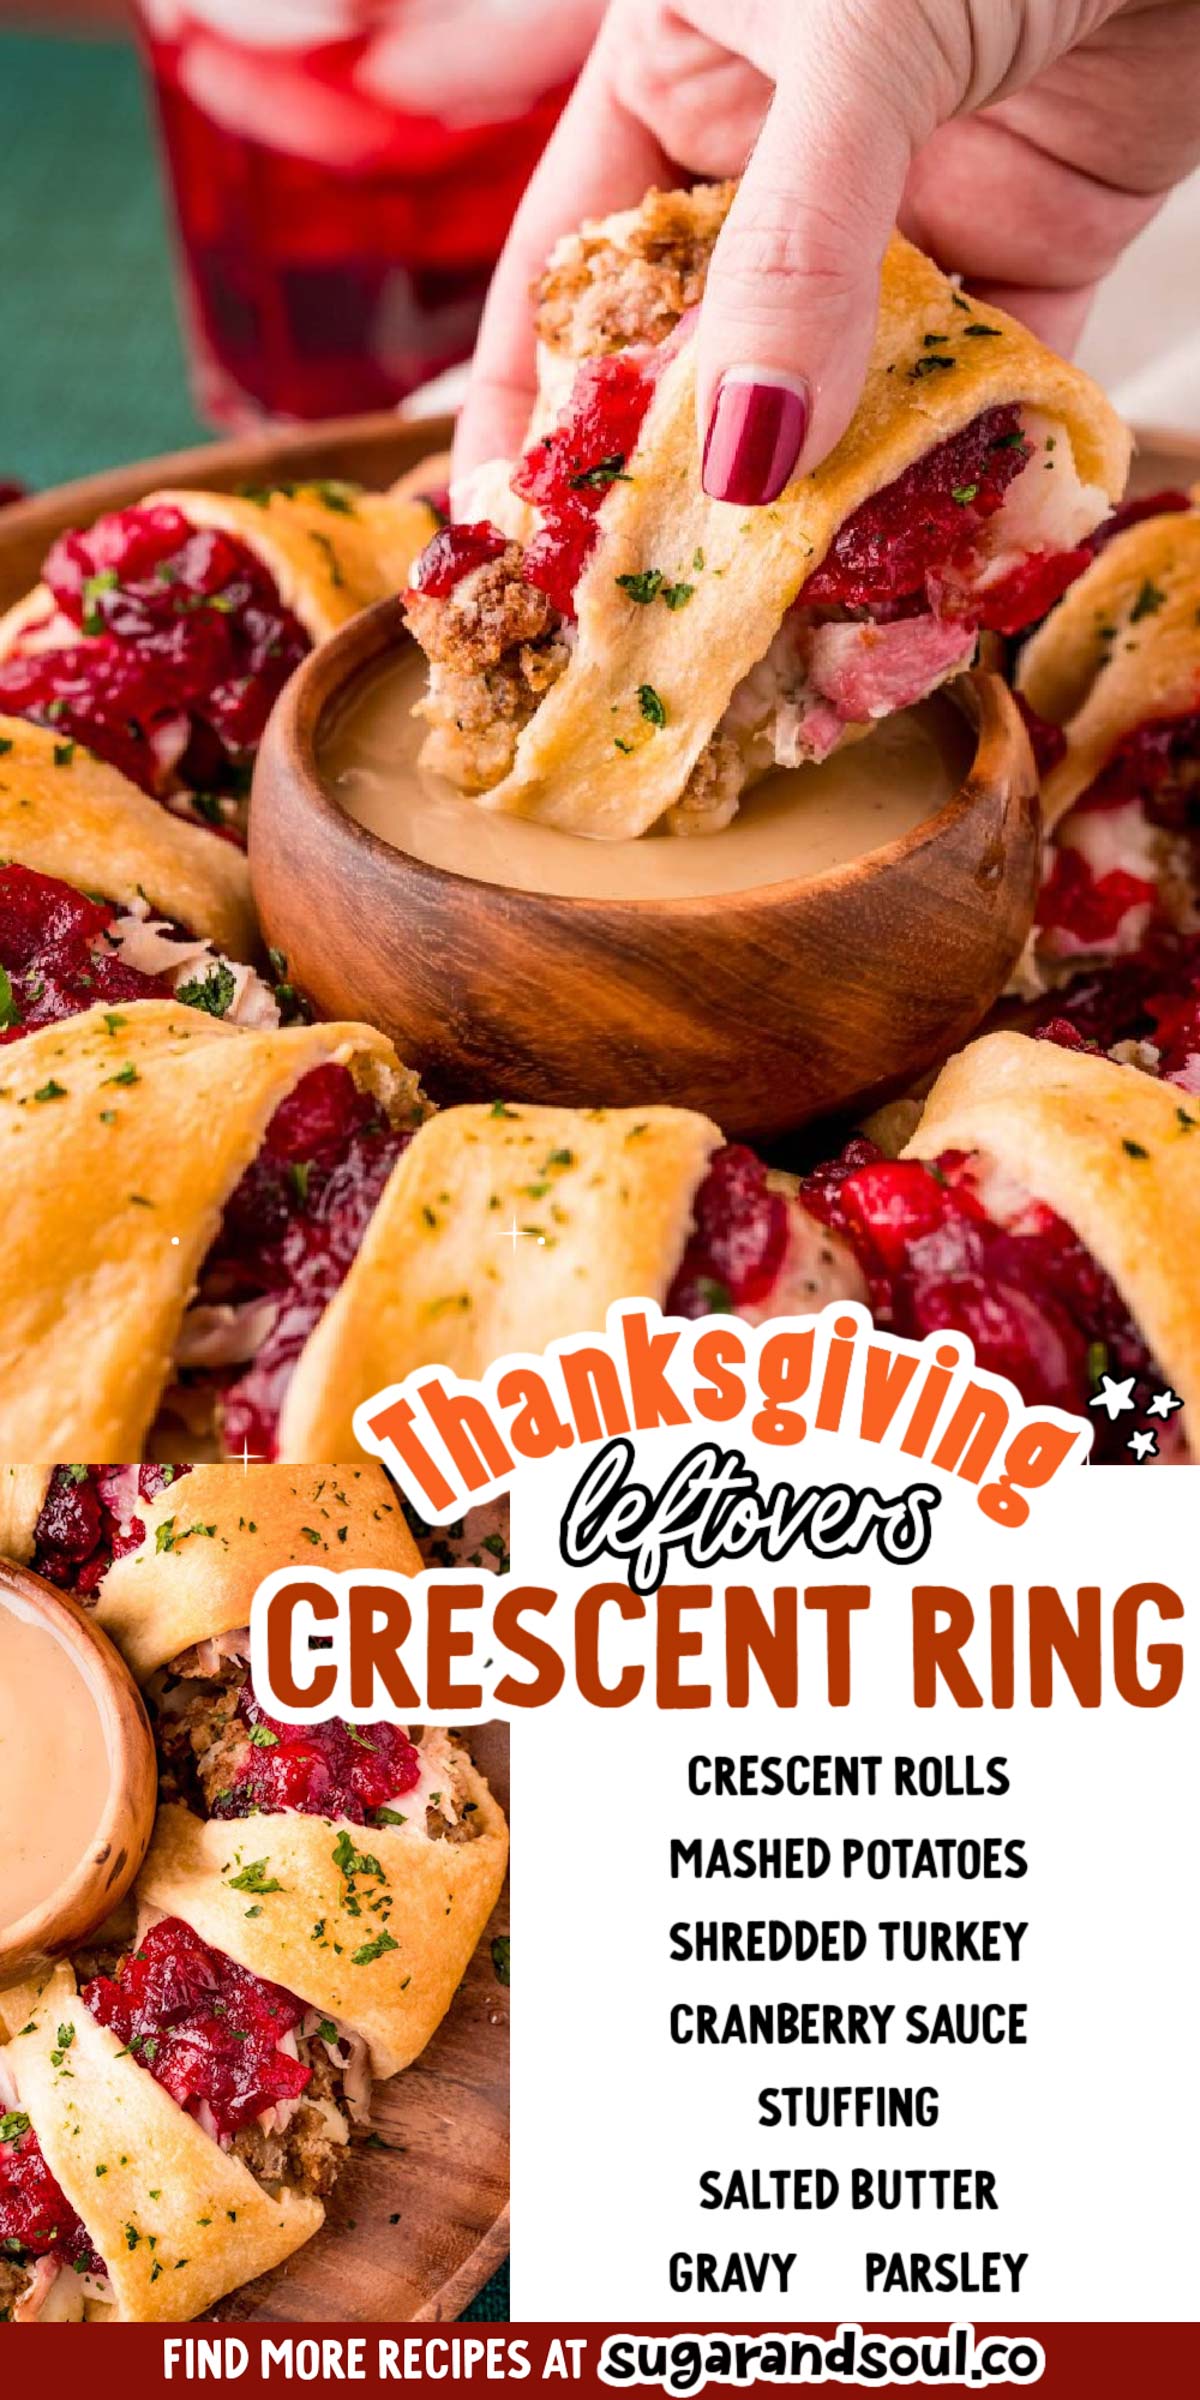 This Thanksgiving Crescent Ring piles your favorite turkey day leftovers onto buttery, flaky crescent rolls for a delicious meal or snack! Baked up to perfection and ready to enjoy in only 35 minutes! via @sugarandsoulco